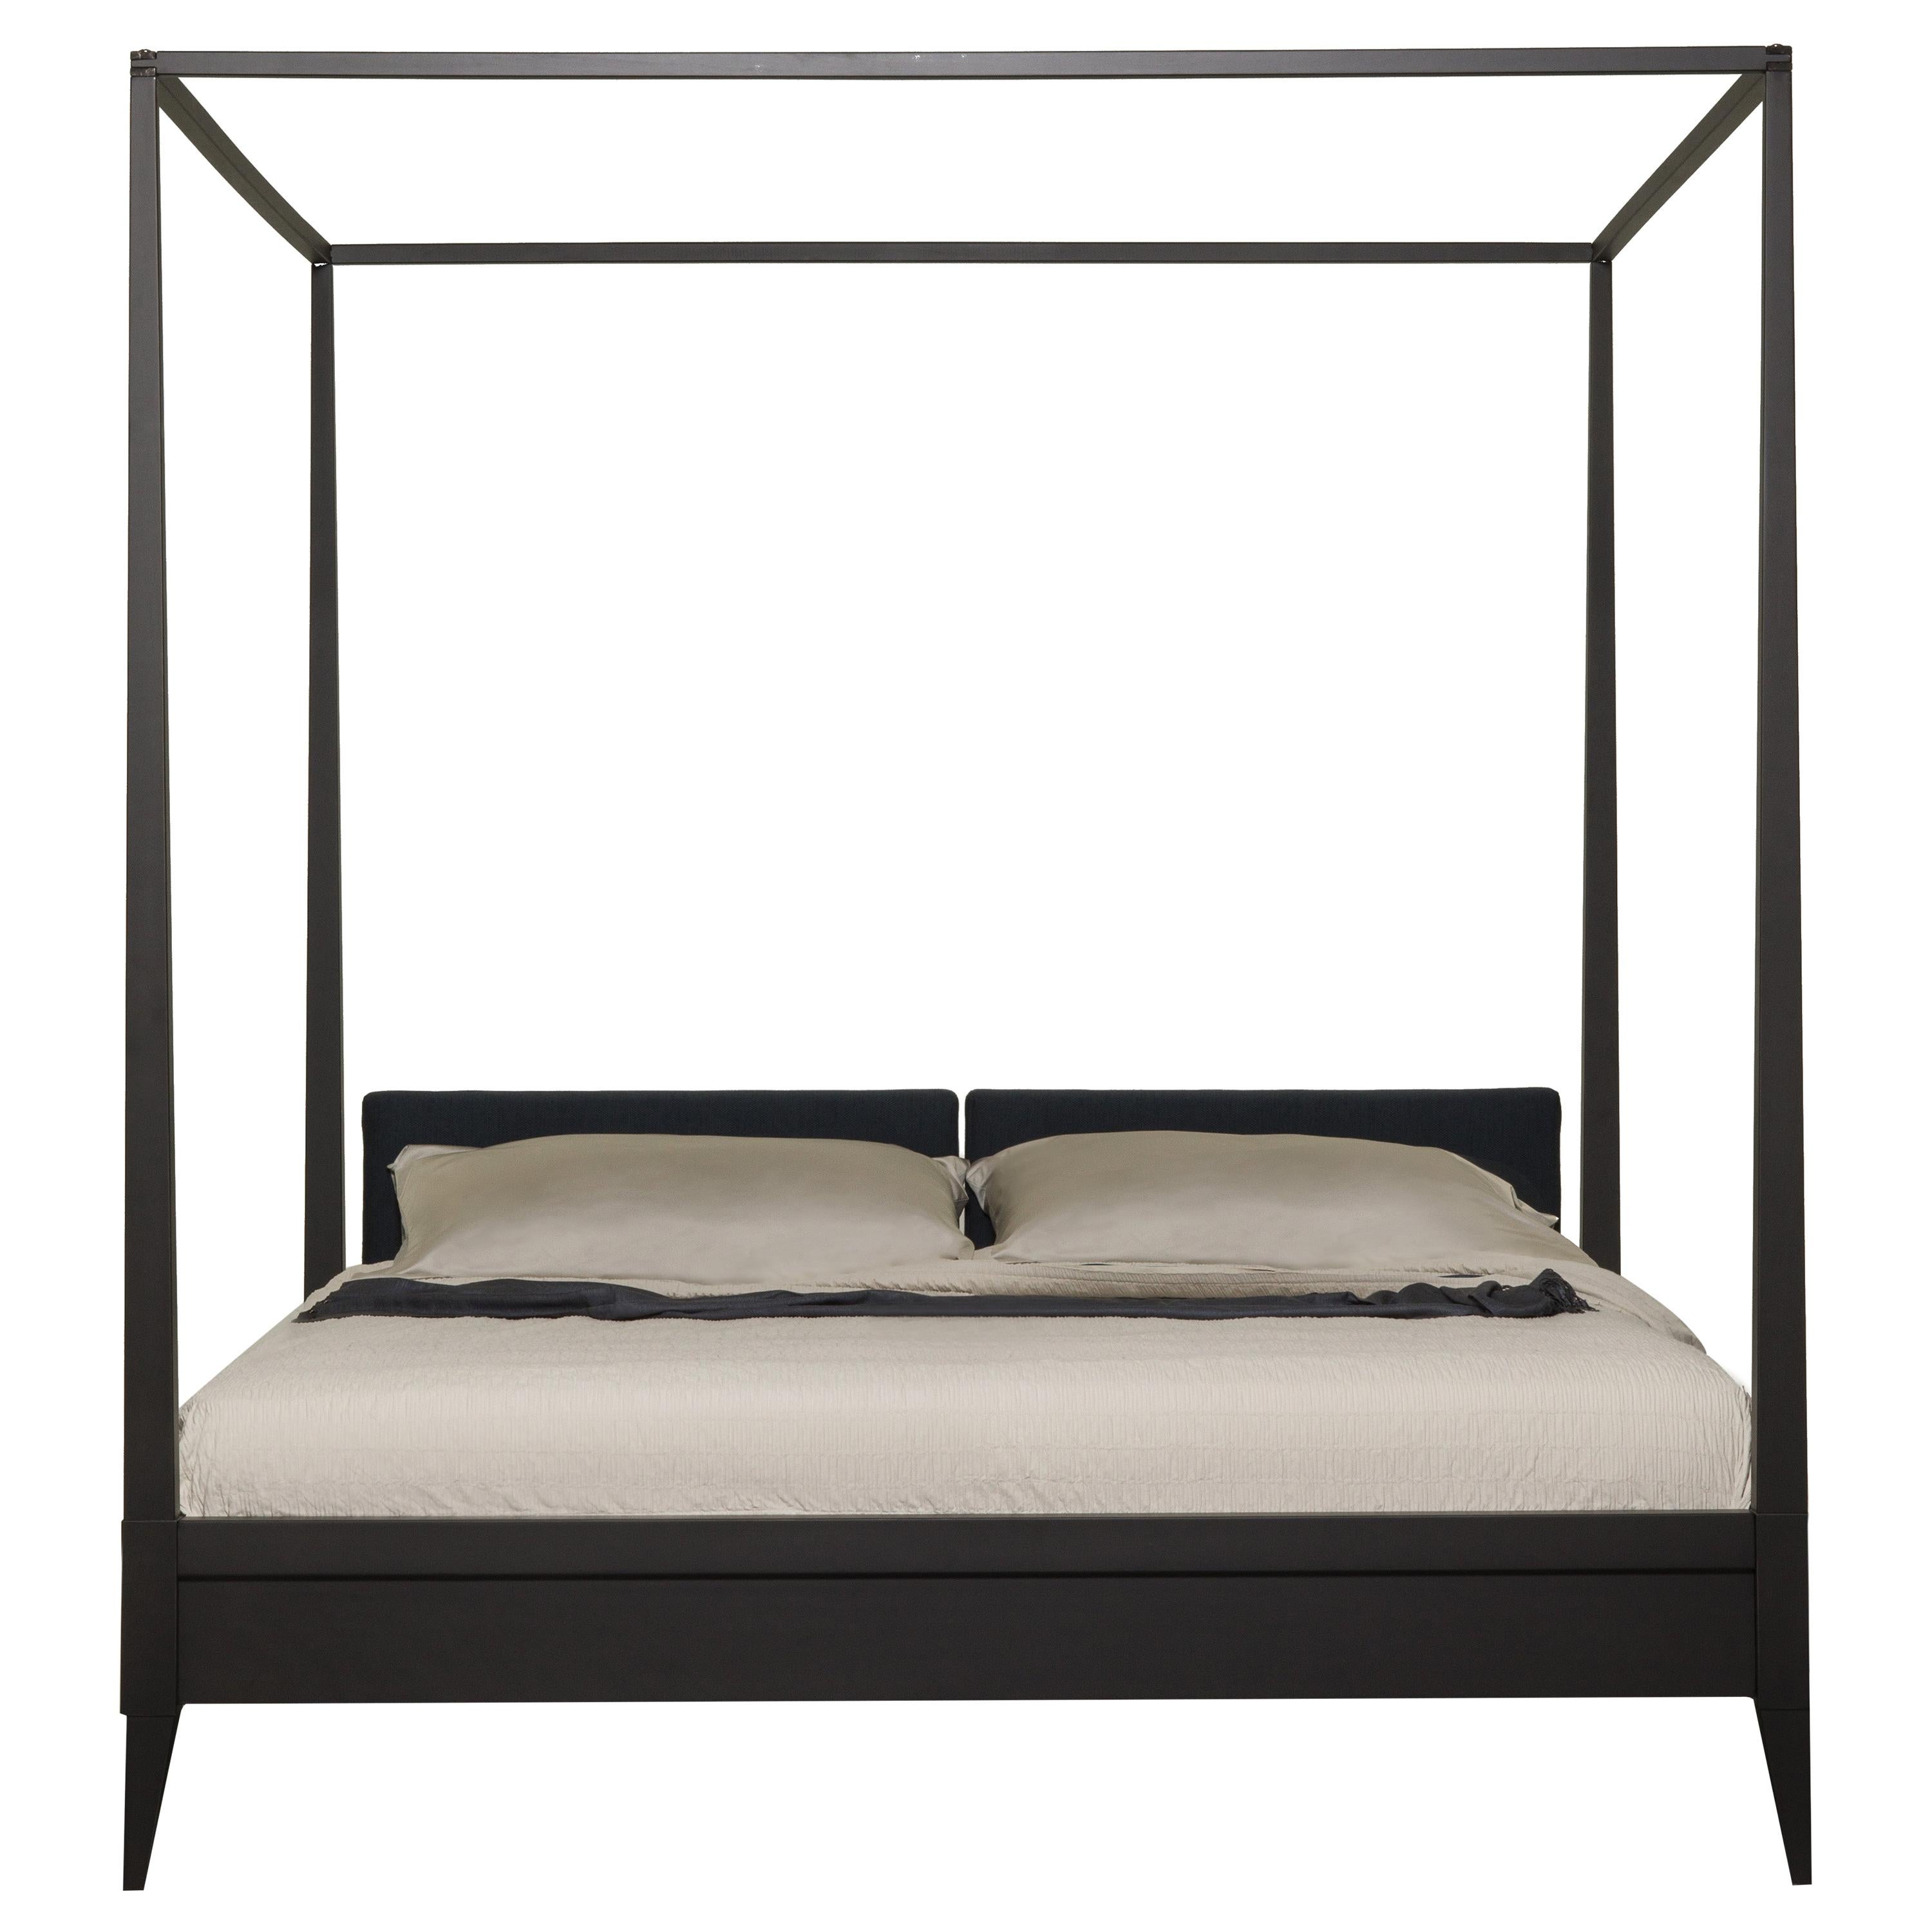 Valentino Canopy Bed by Morelato, made of Cherrywood with Upholstered Headboard